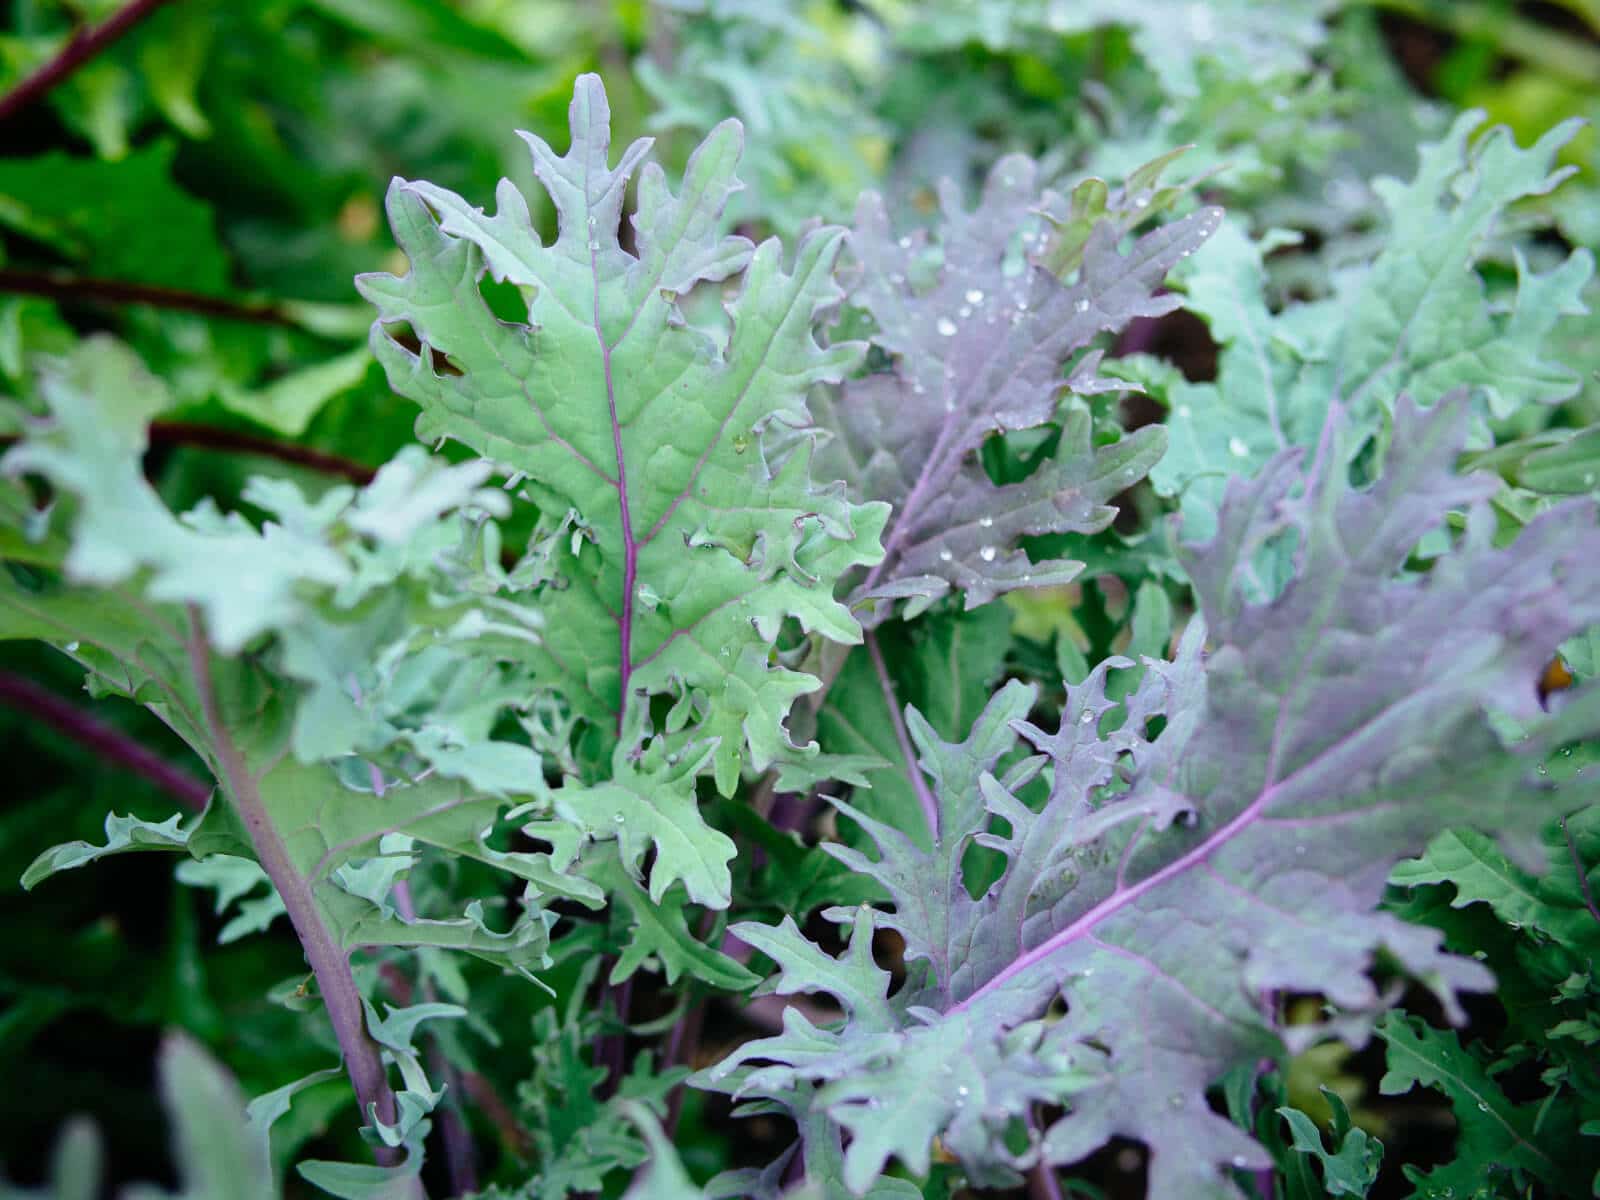 Kale and other brassicas